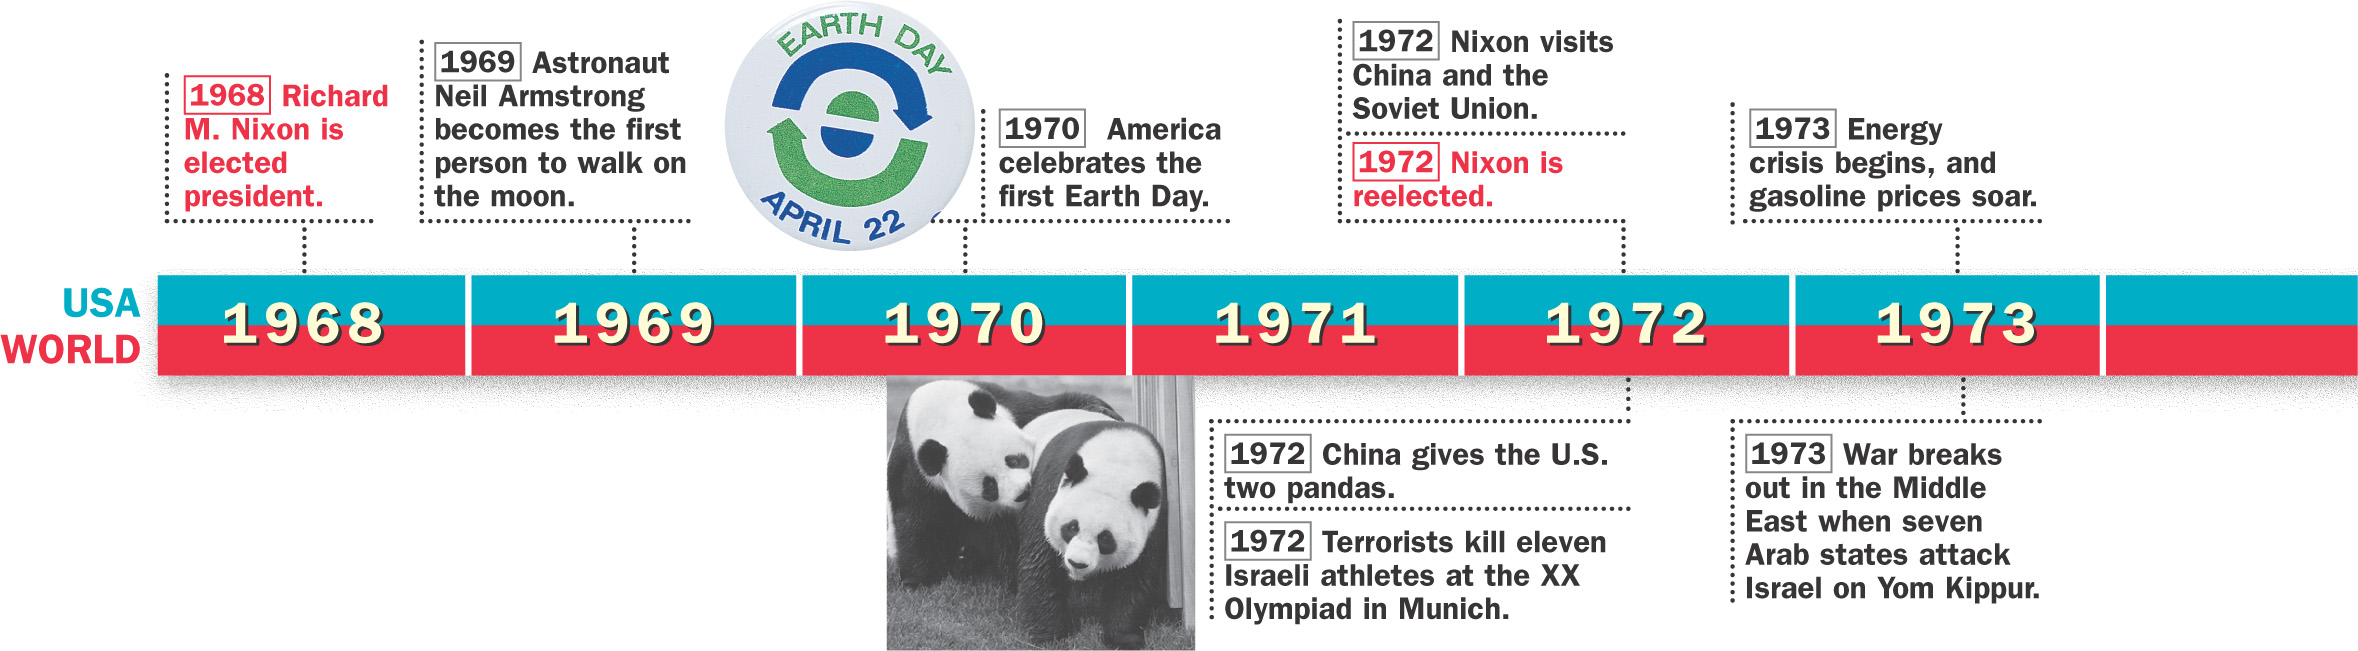 A timeline of historical events from 1968 to 1979 in both the U.S. and the world